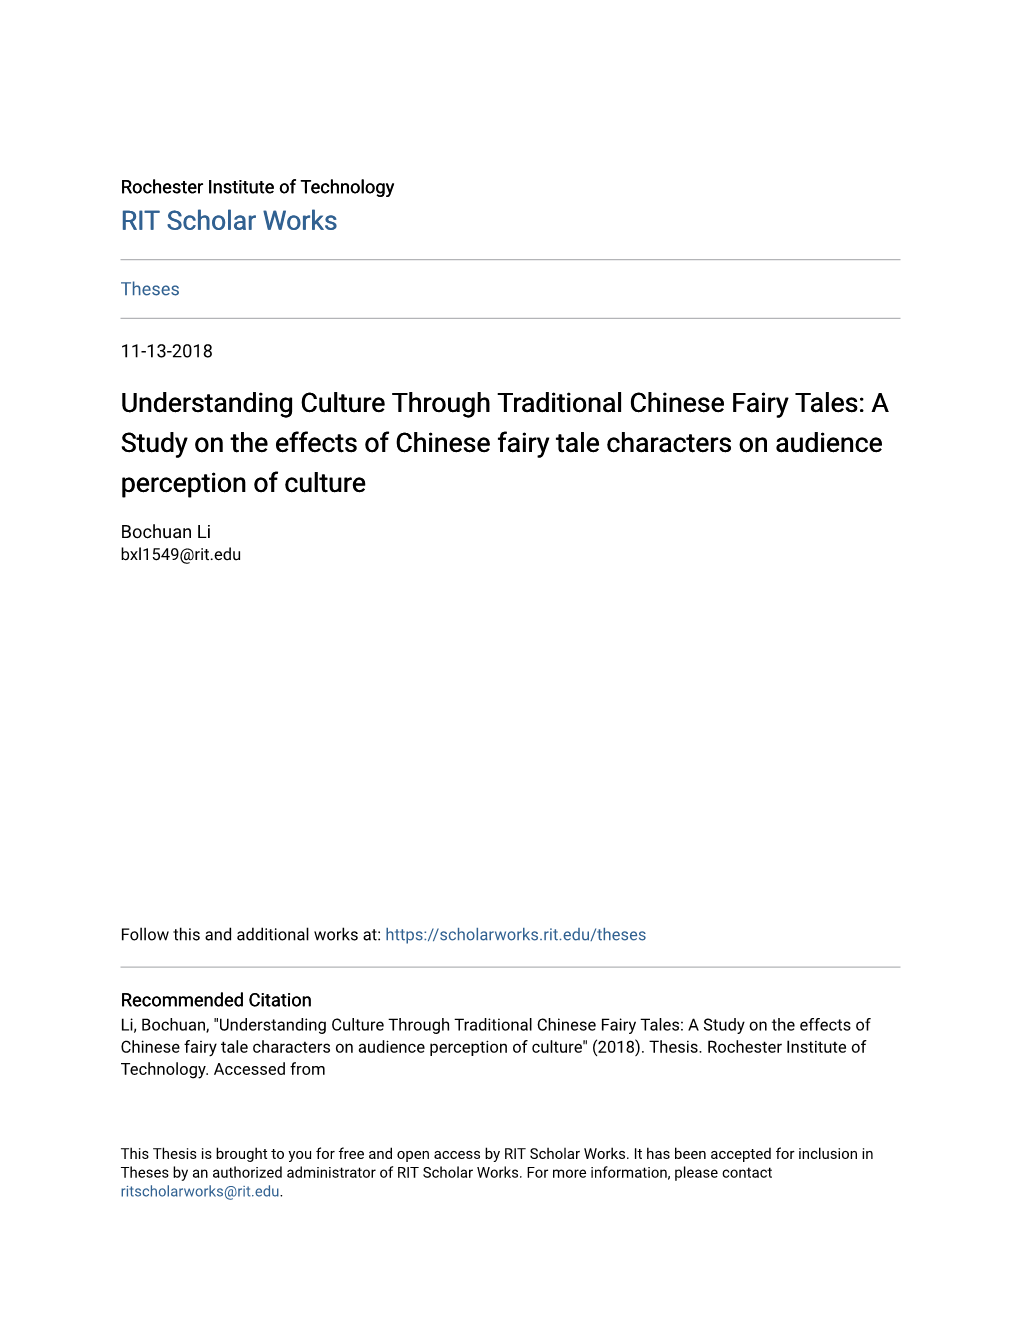 Understanding Culture Through Traditional Chinese Fairy Tales: a Study on the Effects of Chinese Fairy Tale Characters on Audience Perception of Culture